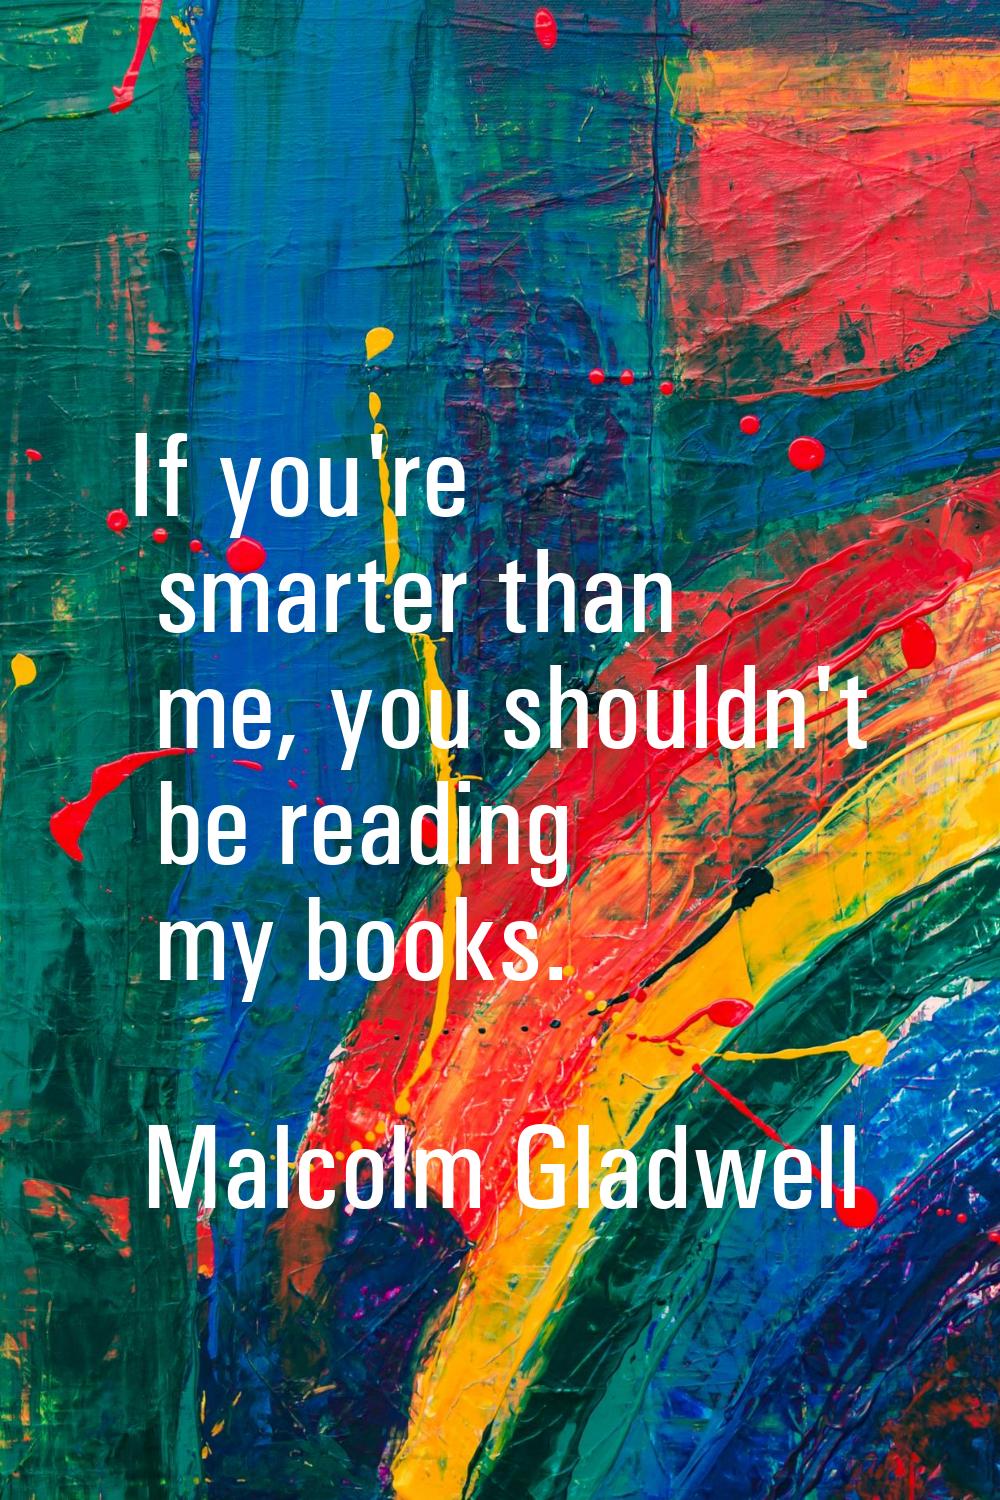 If you're smarter than me, you shouldn't be reading my books.